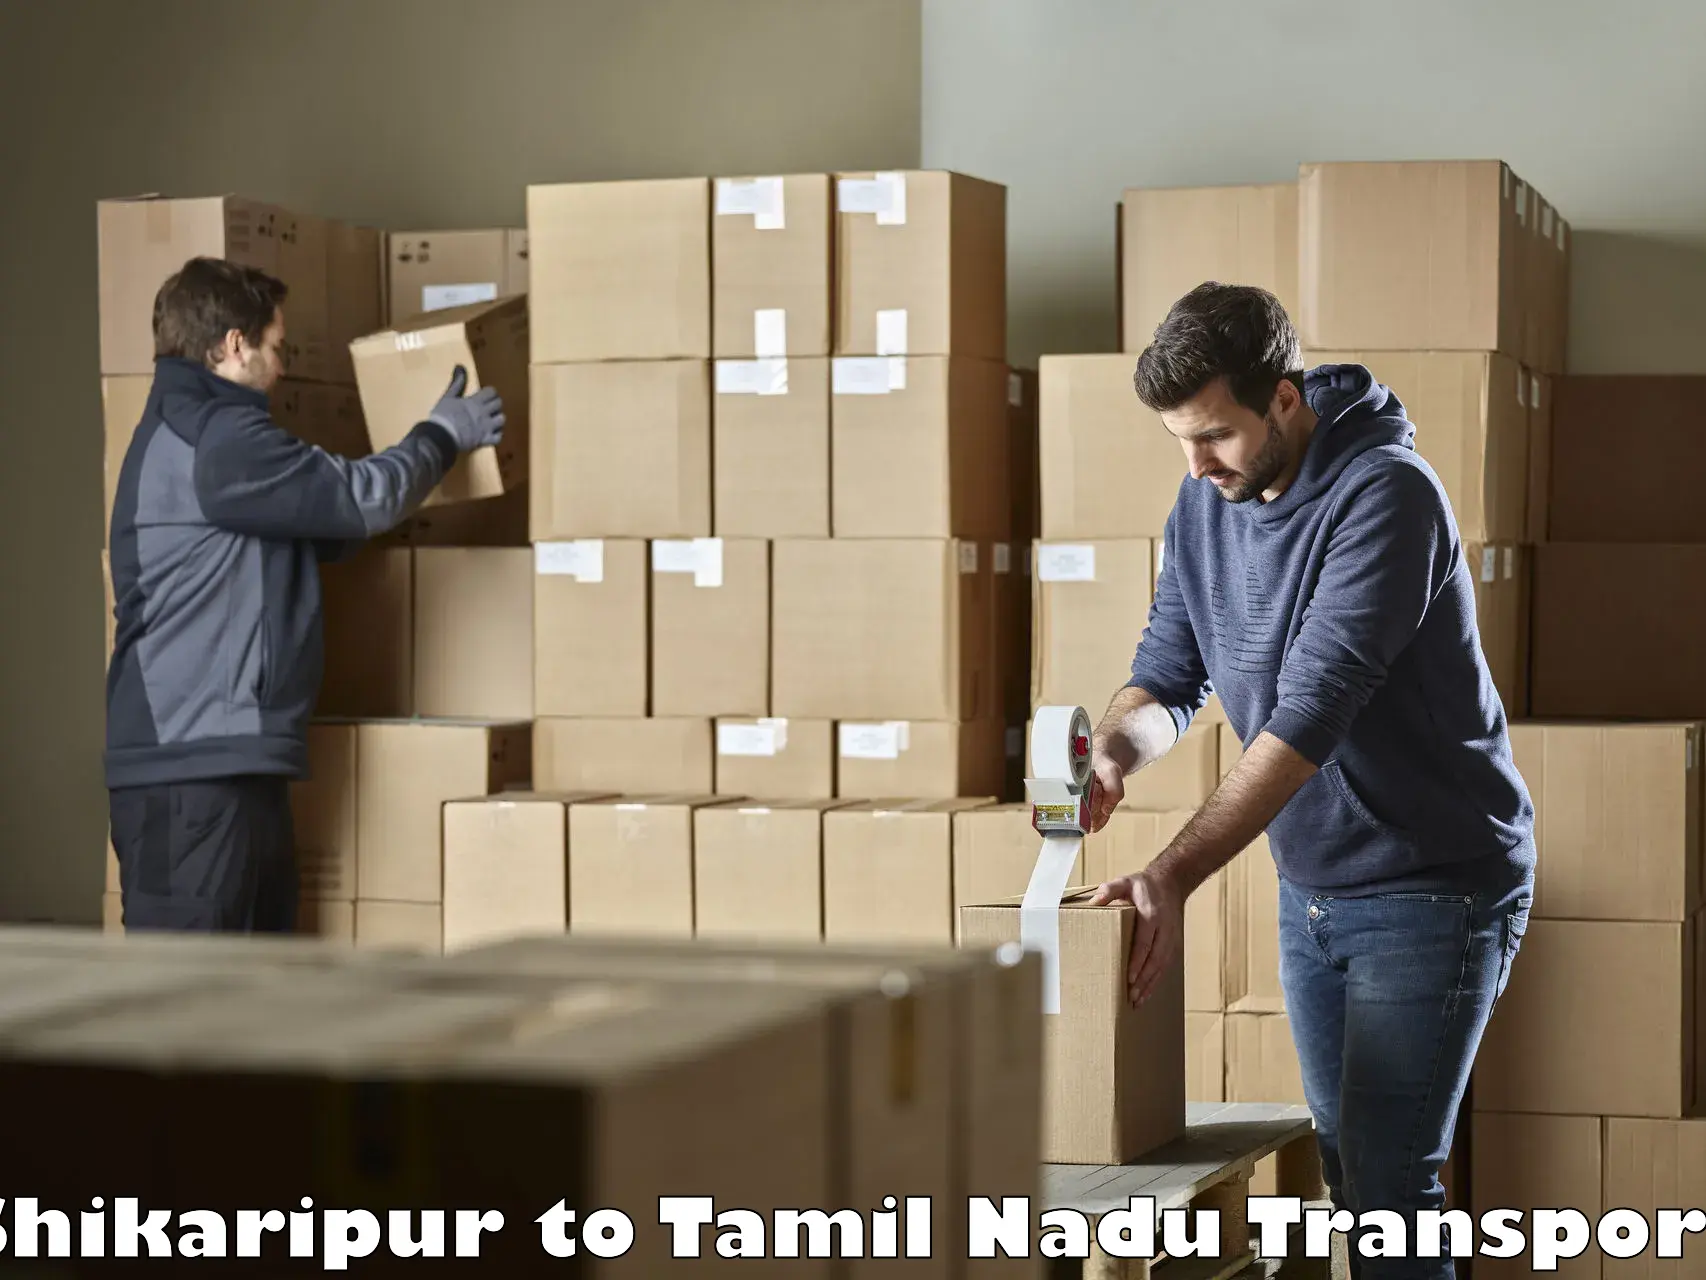 Commercial transport service Shikaripur to Mylapore